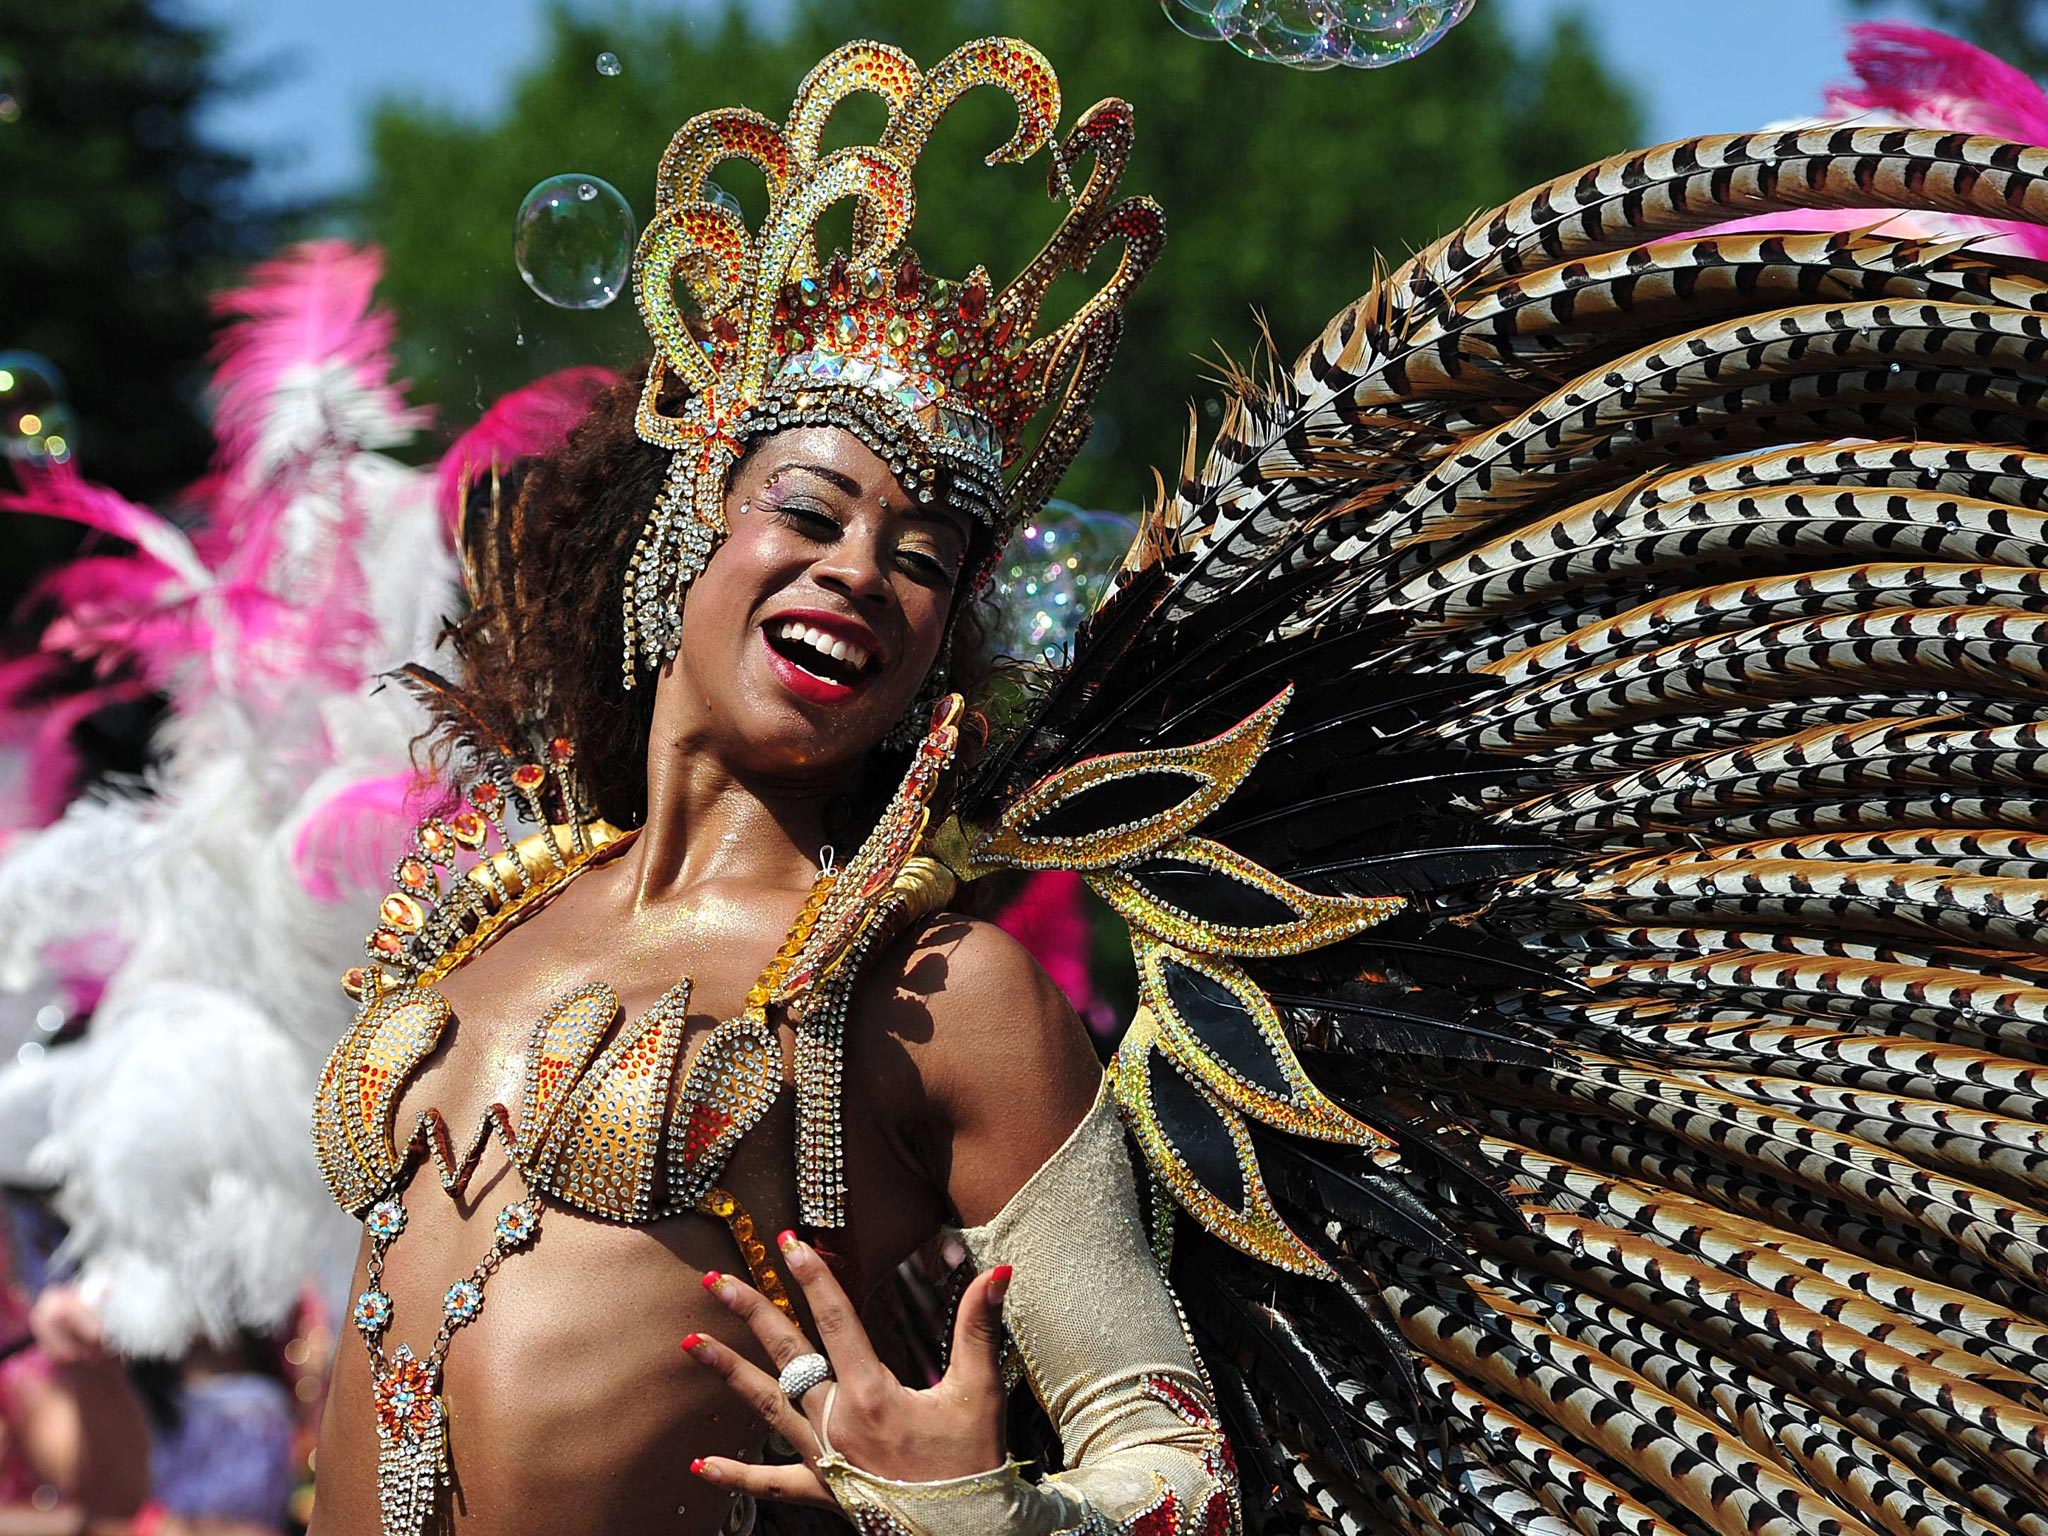 A performer takes part in the parade on the second day of the Notting Hill Carnival in west London